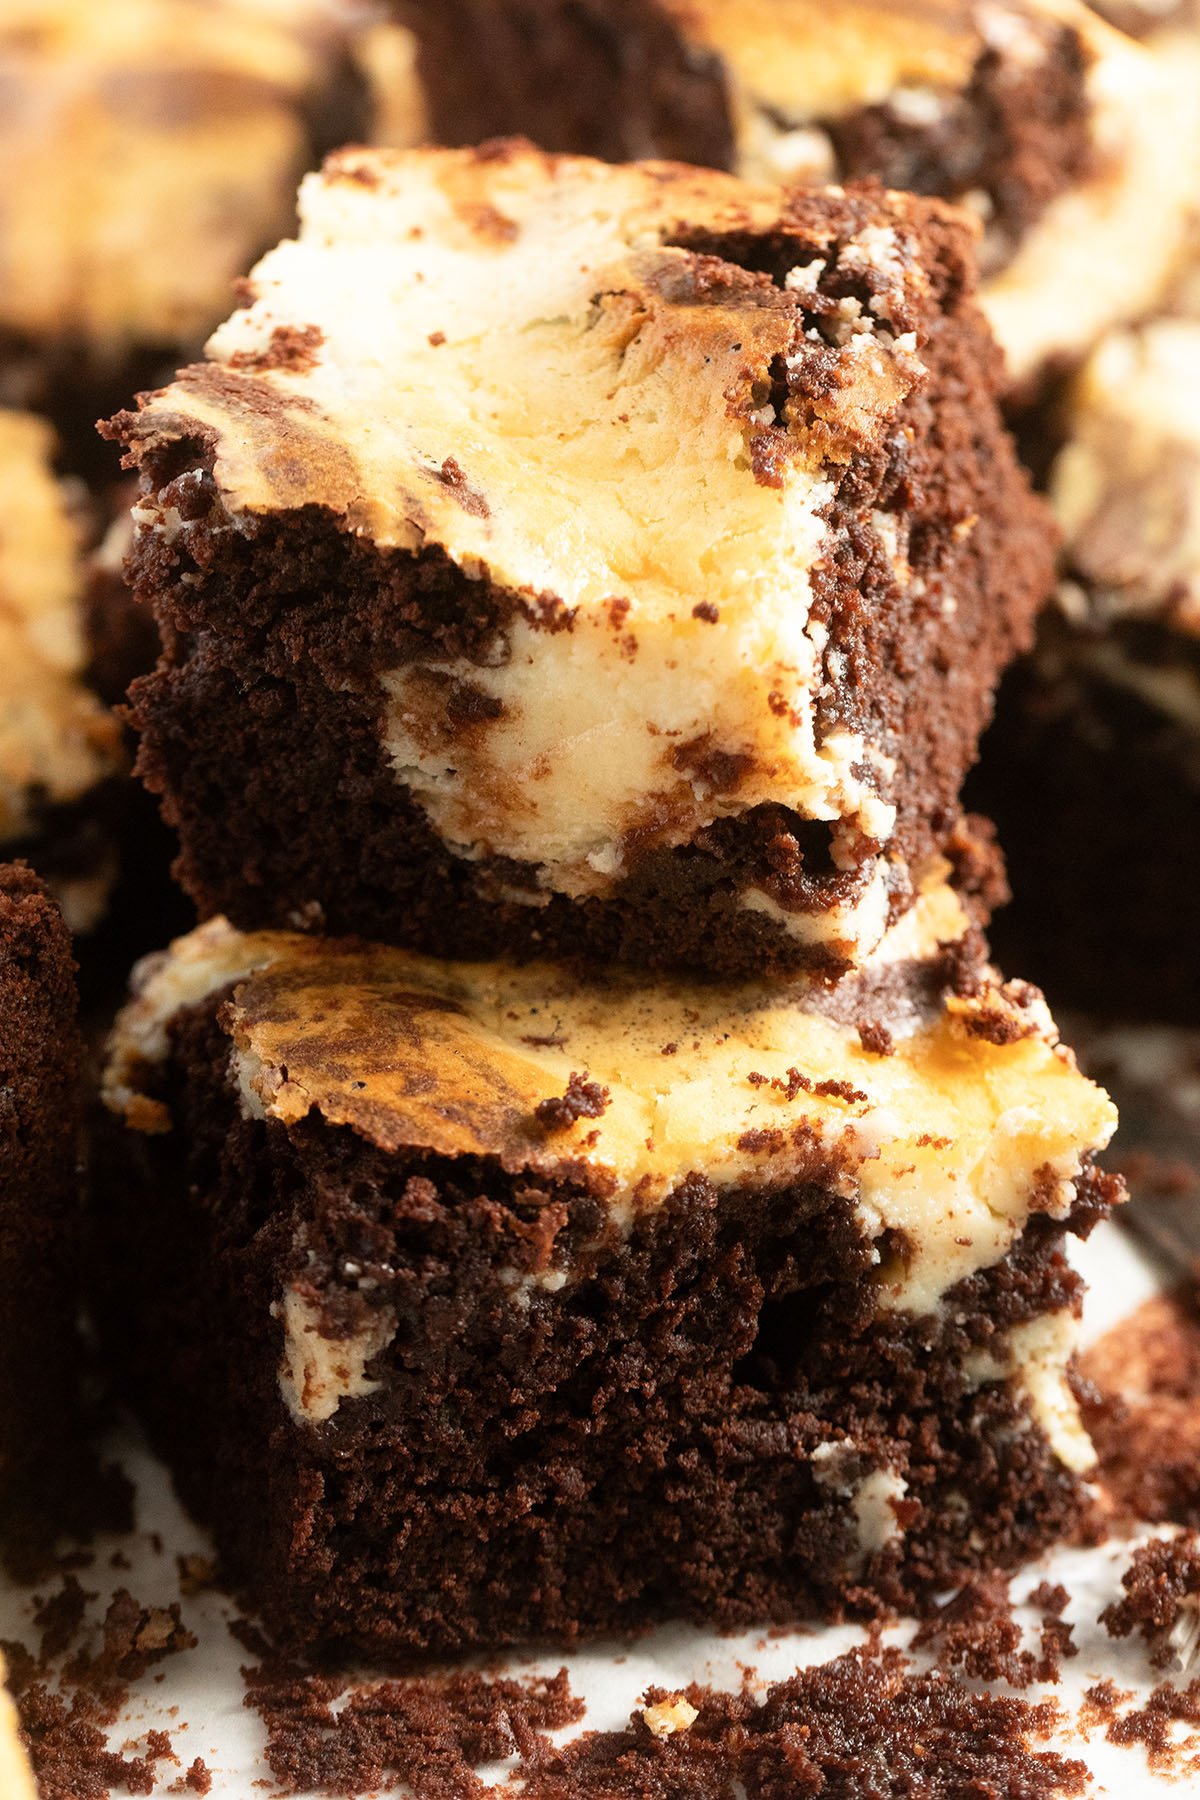 stapled black and white brownies made with condensed milk.